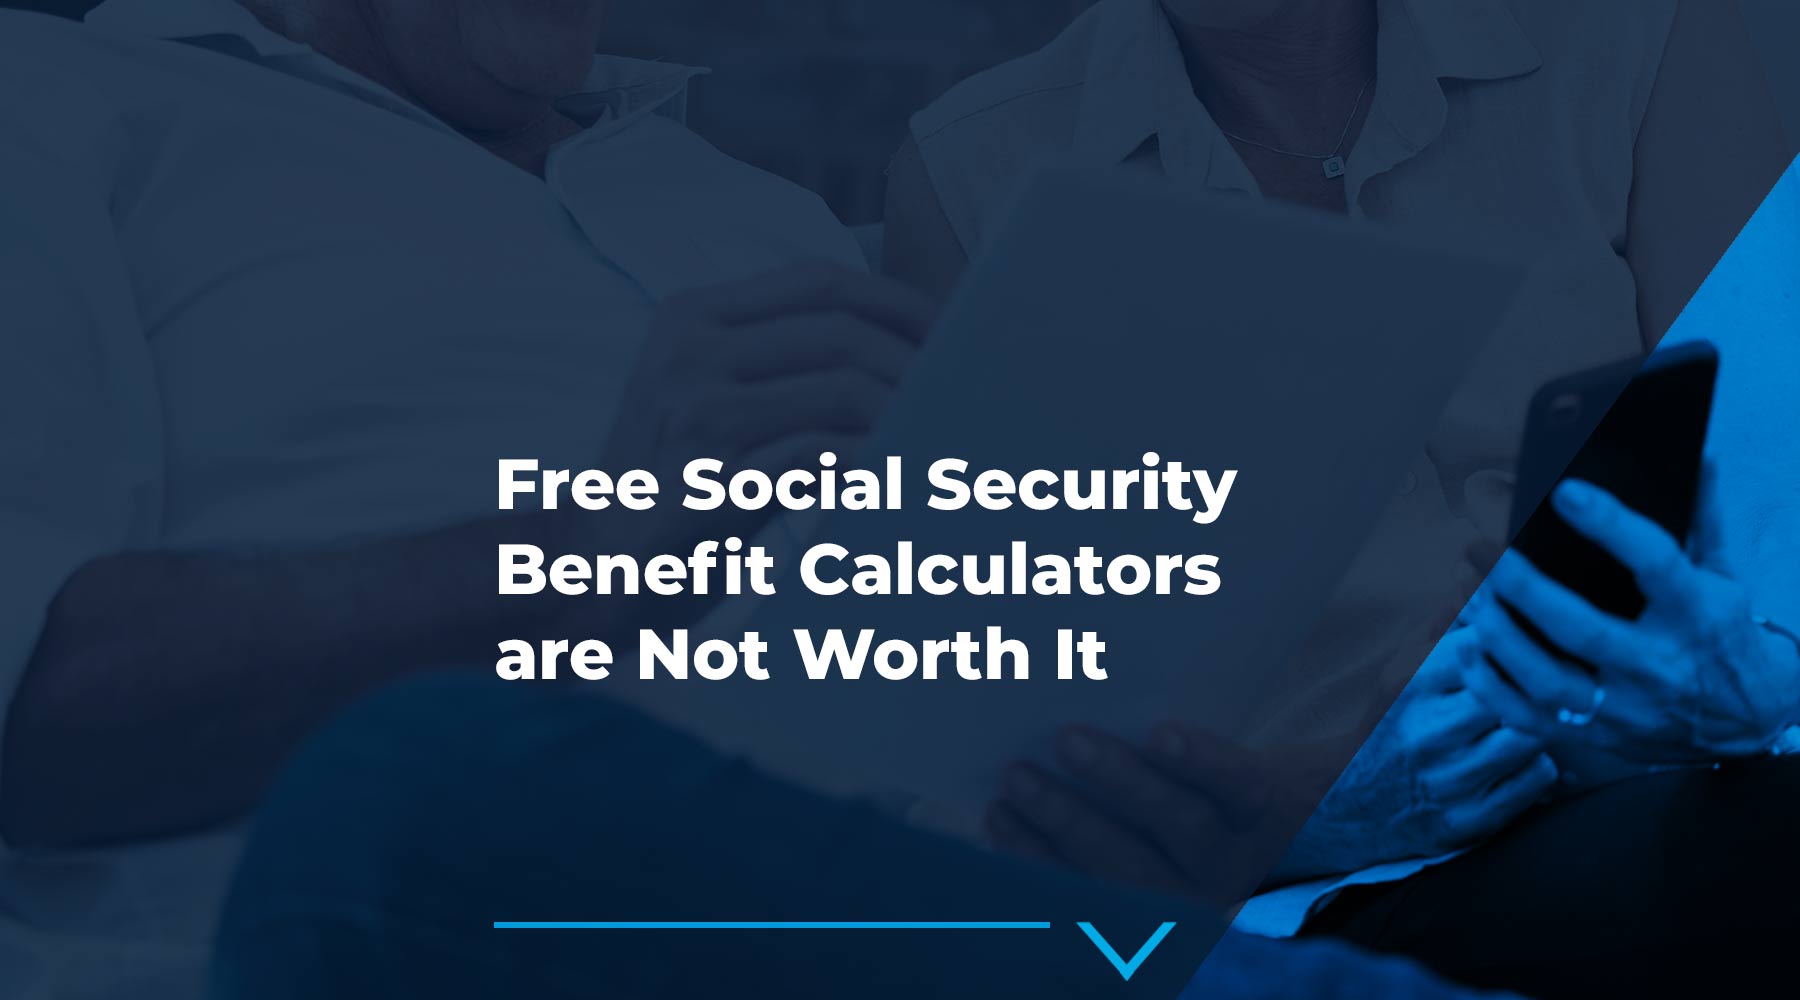 Free Social Security Benefit Calculators are Not Worth It